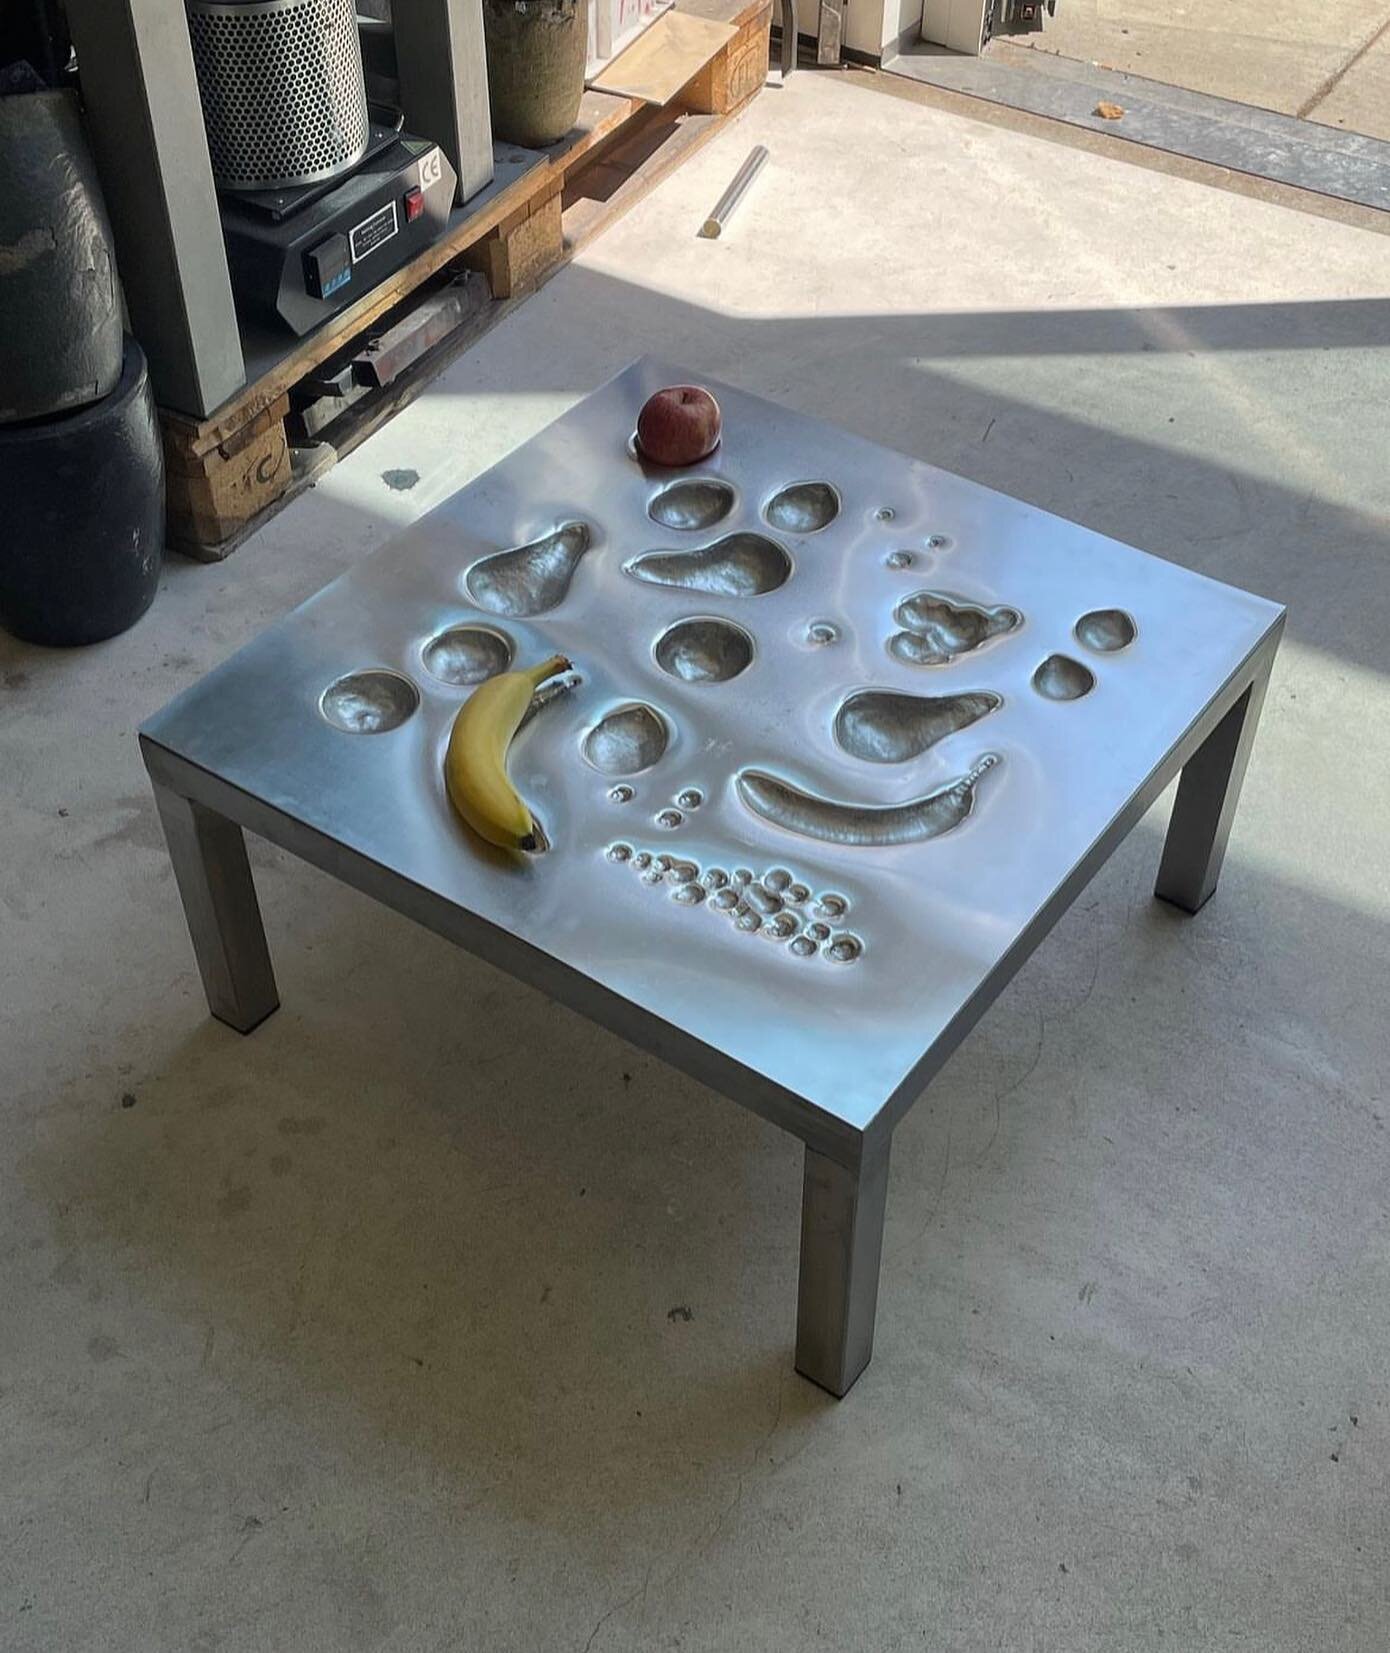 Fruit Table by Lisa Cipriano, 2022
@hina_v_1023 
.
.
.
.
.
#inspo #inspiration #interiordesign #arttable #berlindesign #fruits #carvedtable #metaltable